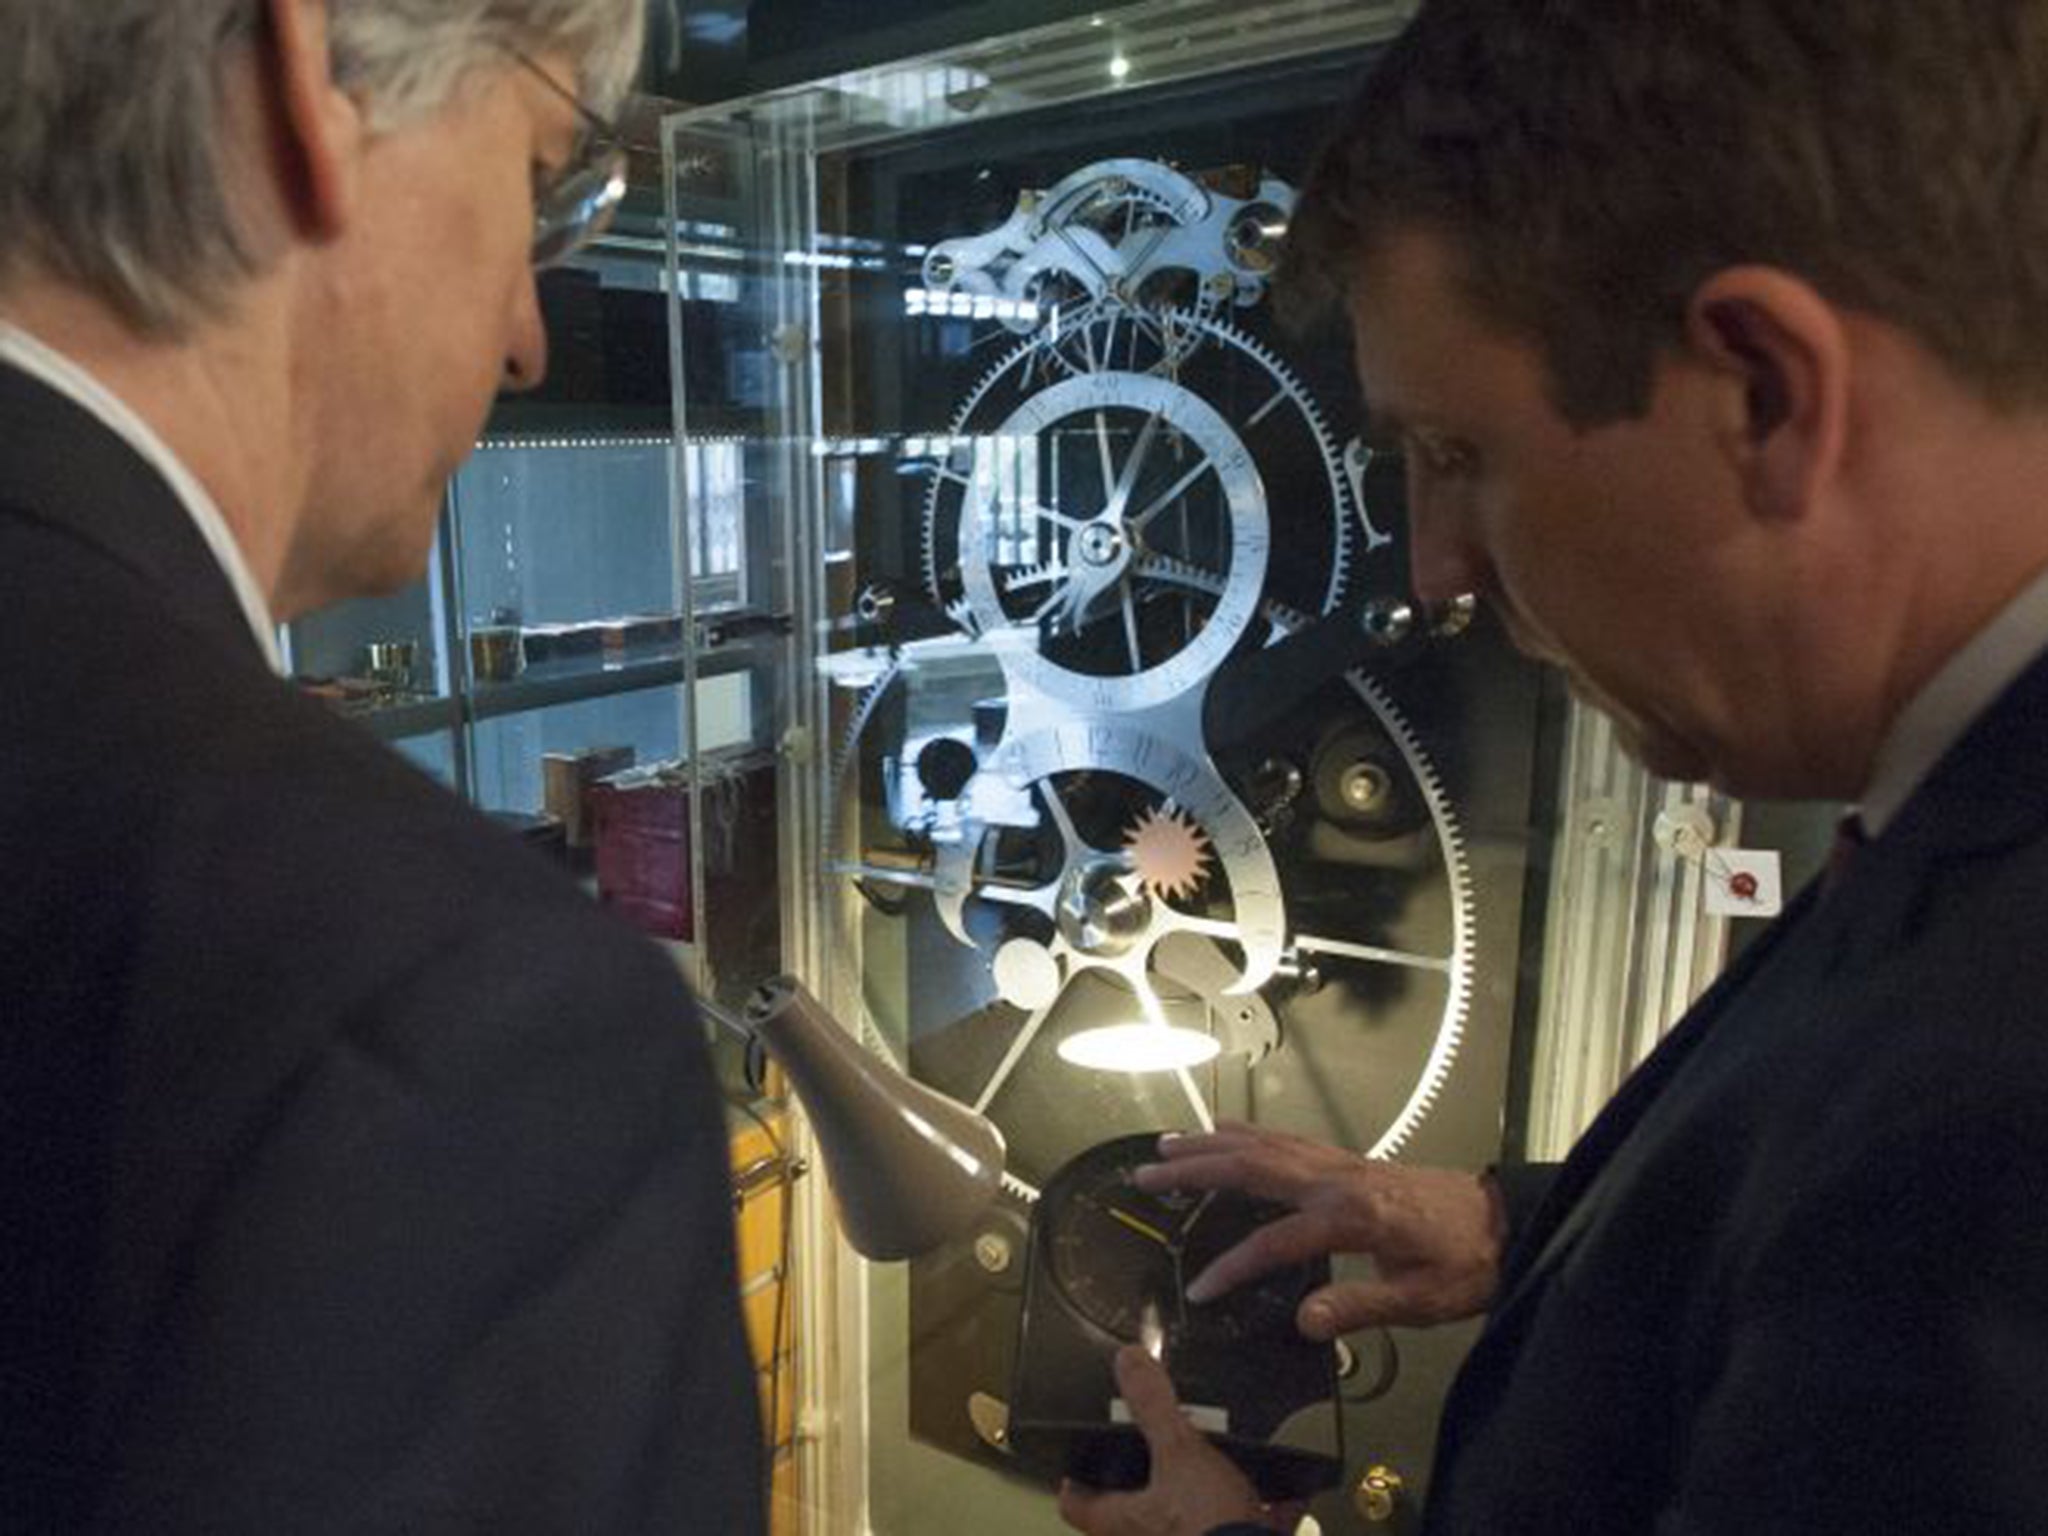 The clock, built from instructions in a book from the 18th century, completes its test